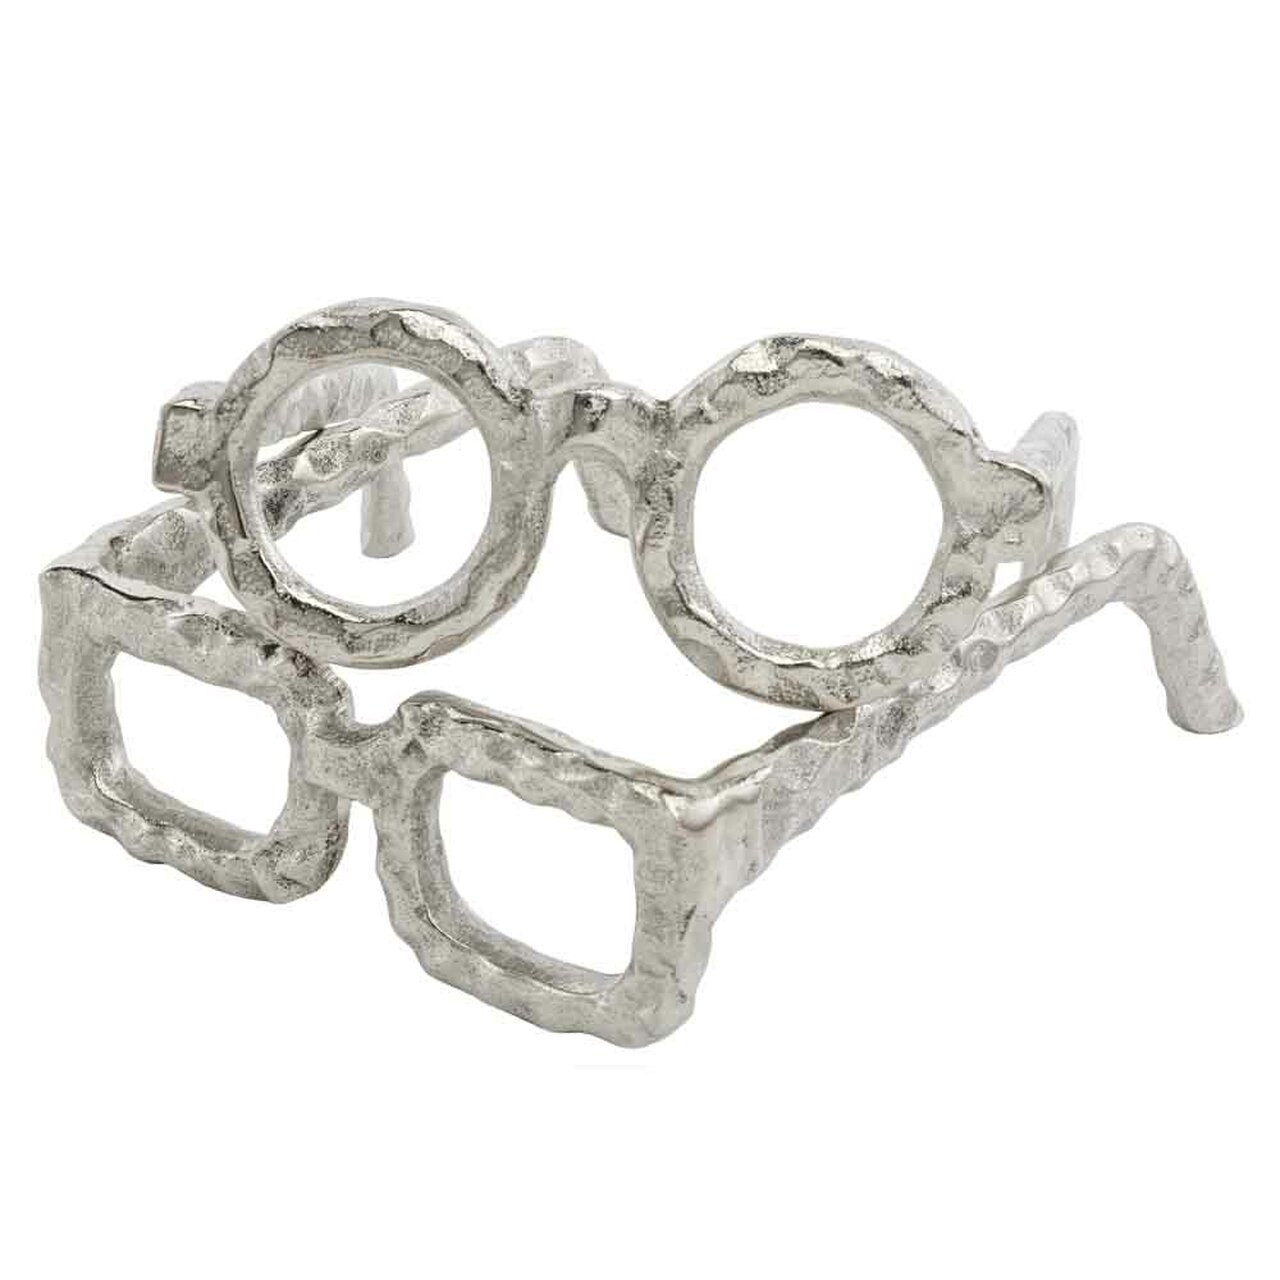 Raw Silver Textured Square Glasses Sculpture